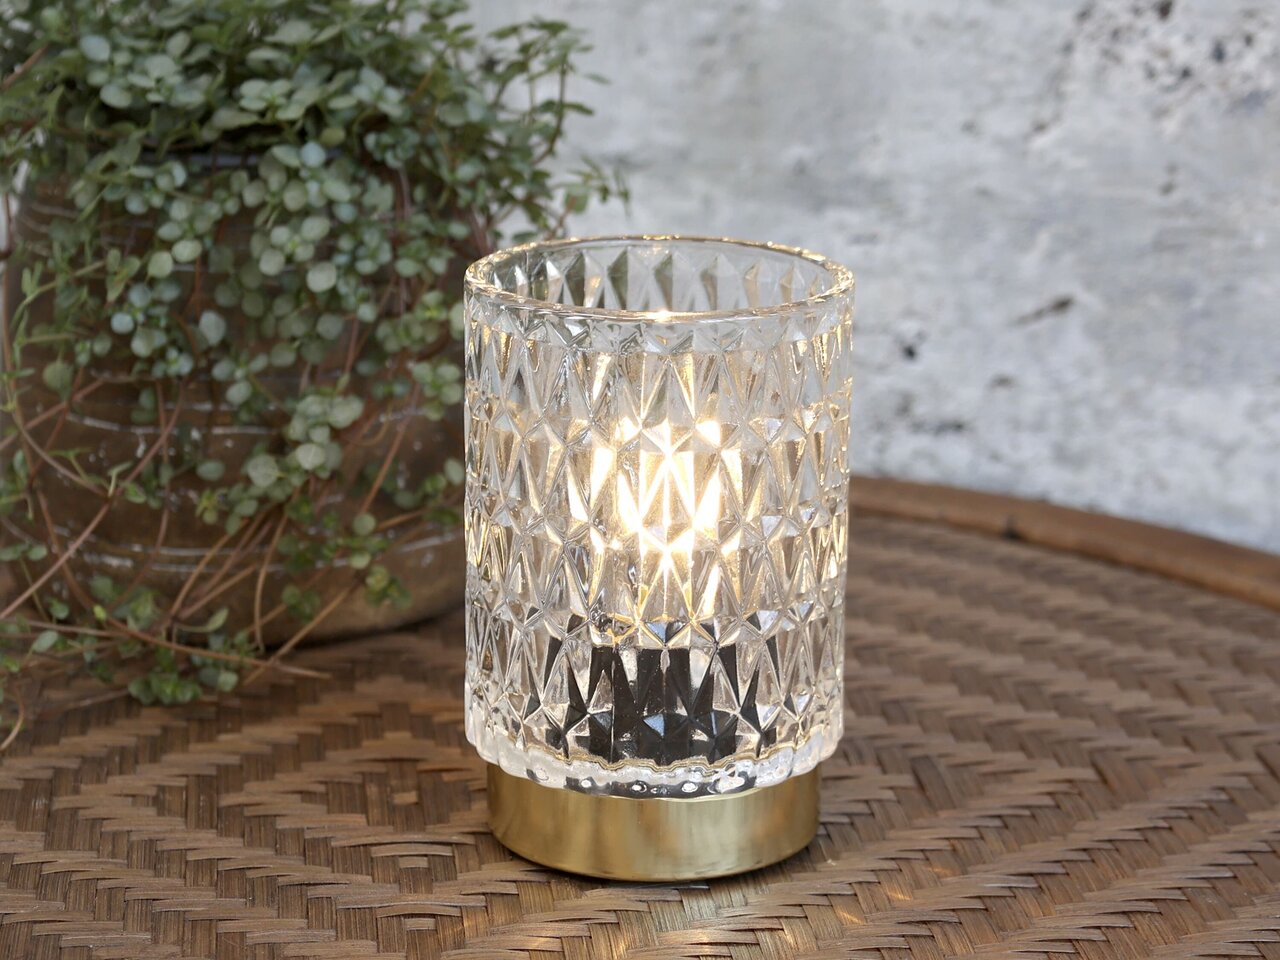 Chic Antique Tischlampe mit Diamant Muster Preview Image